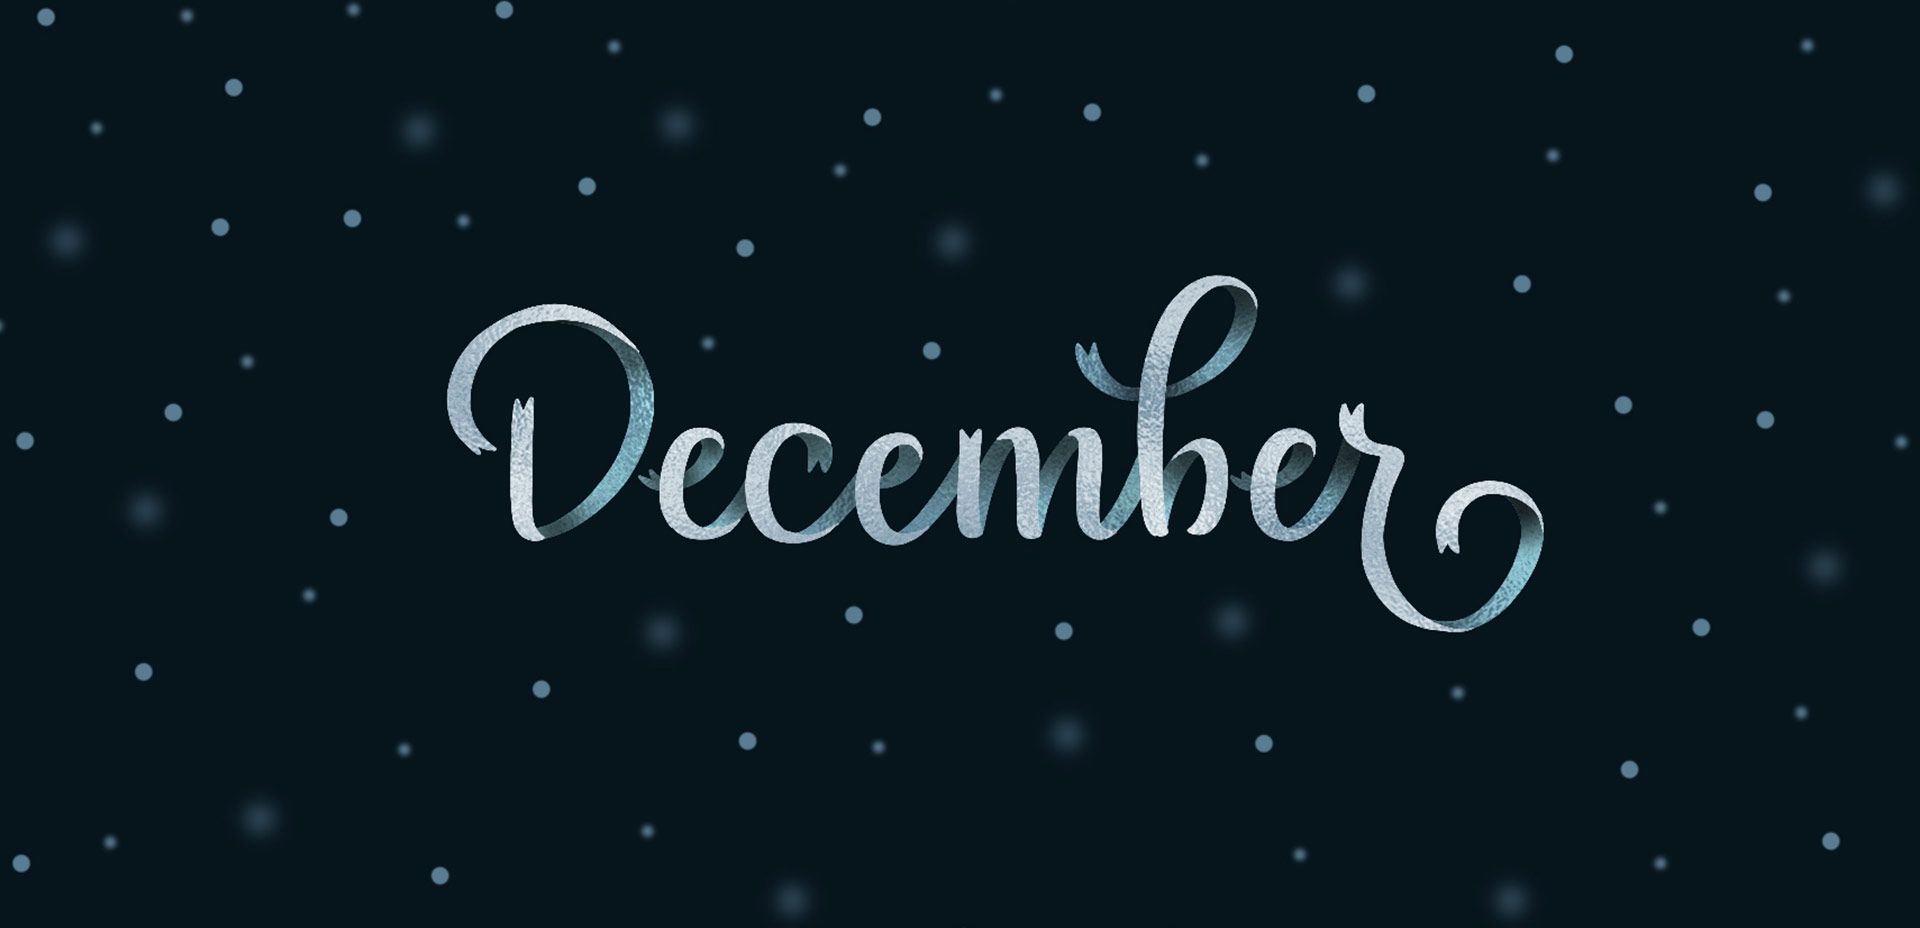 December - The twelfth month of the year, December is the last month of the winter season and the first month of the Christmas season. - December